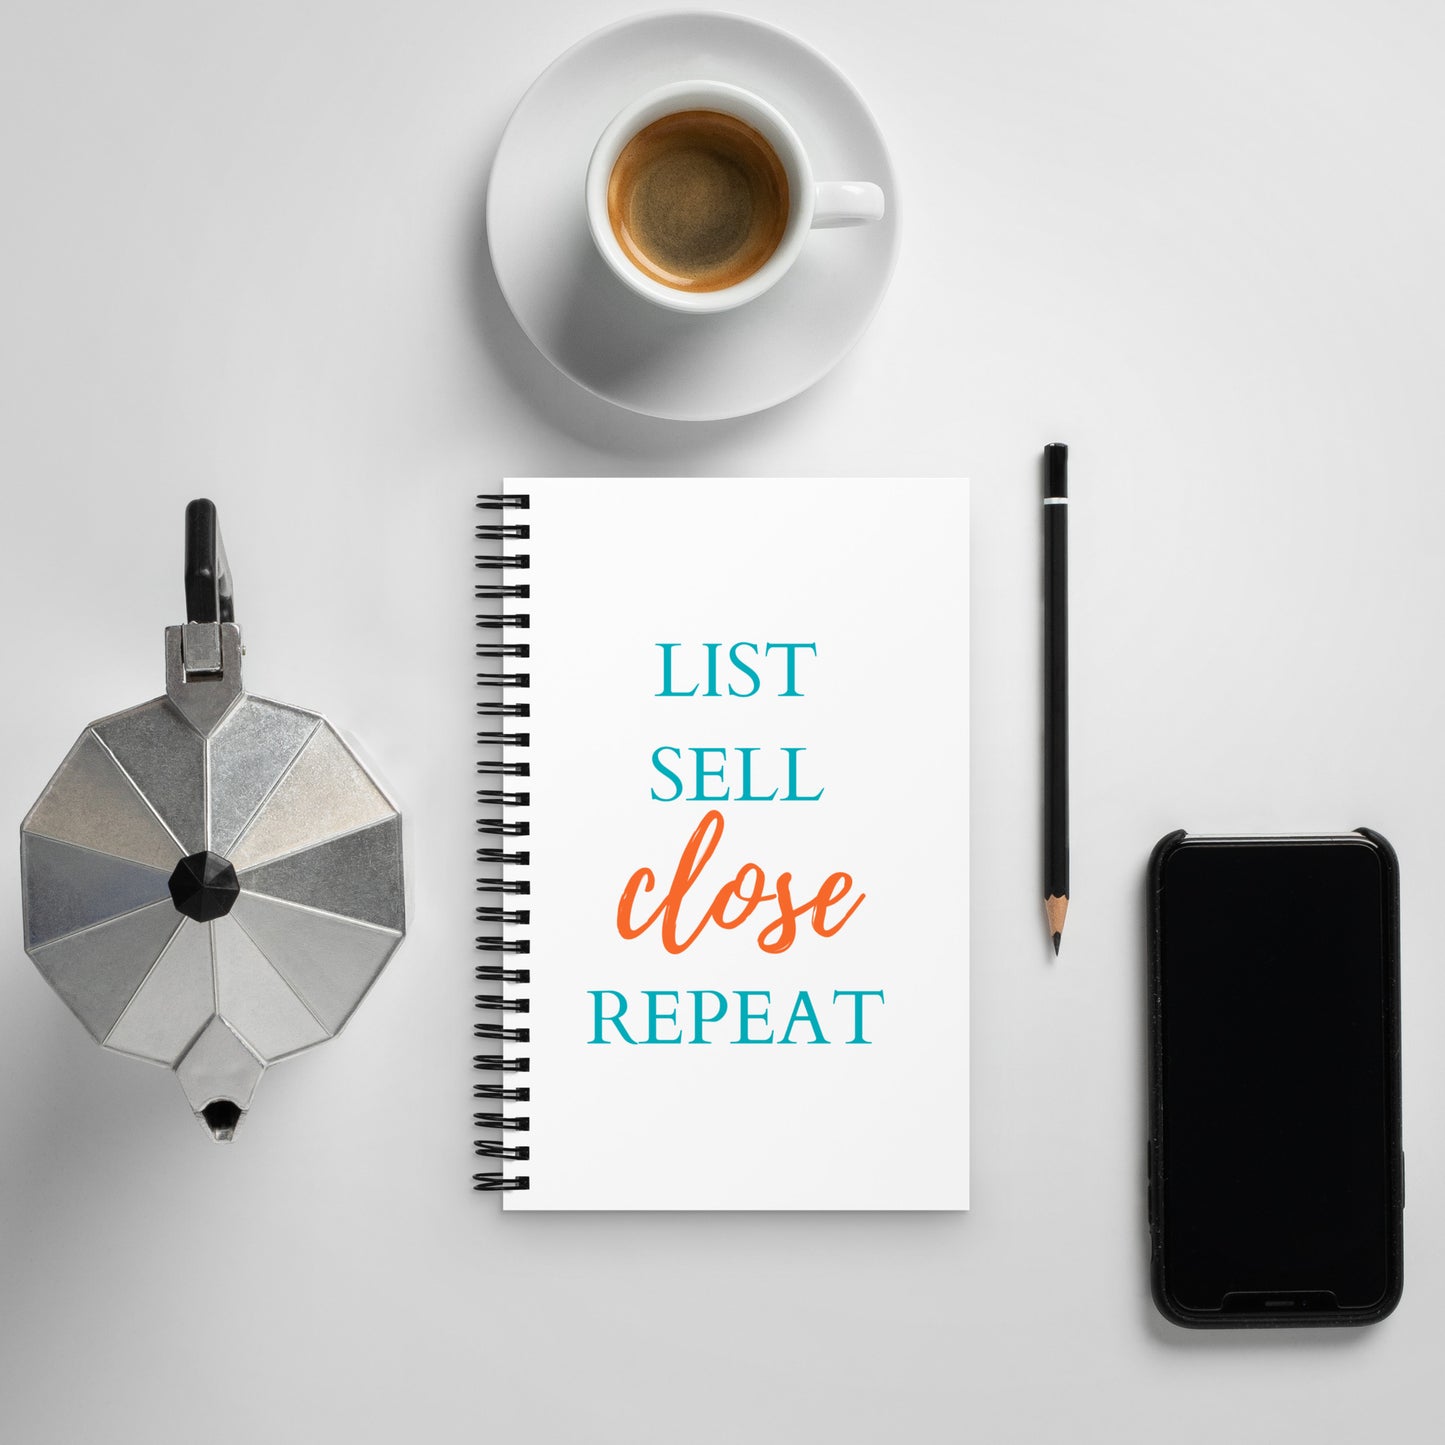 List Sell Close Repeat Spiral notebook